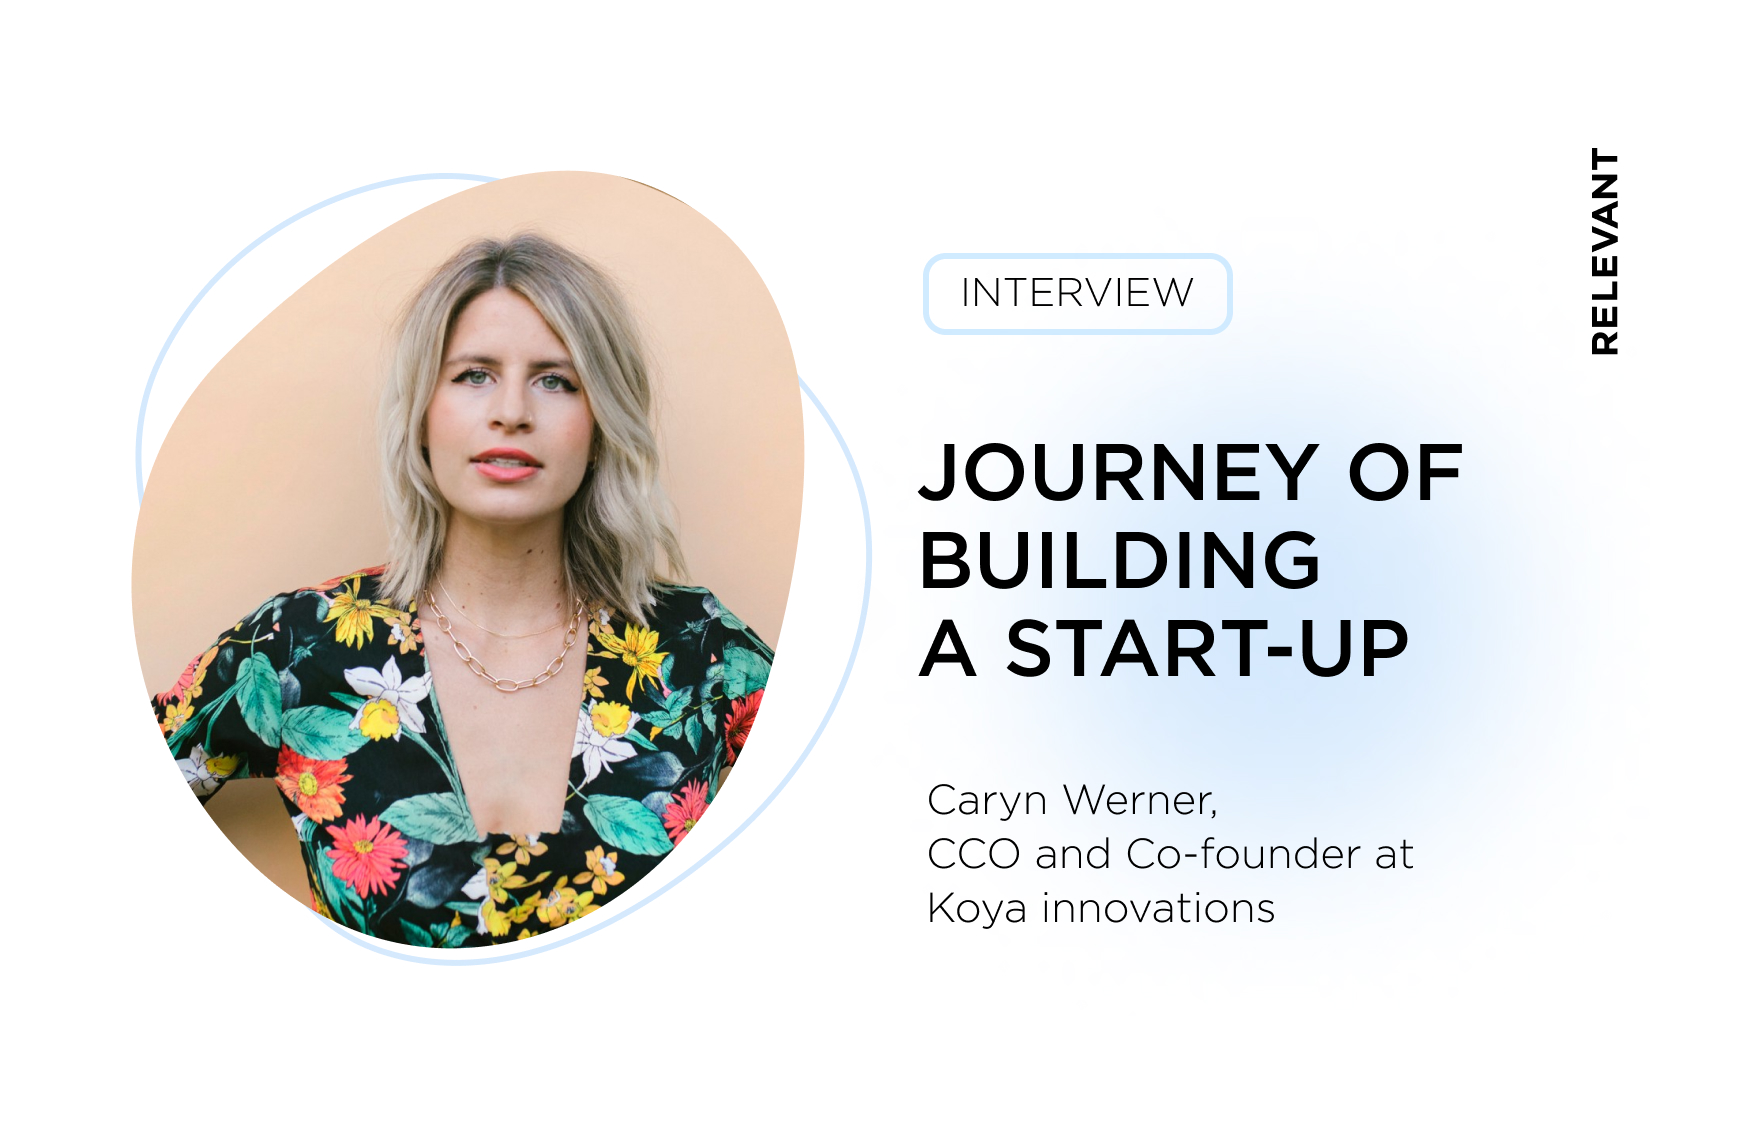 Caryn Werner of KOYA Innovations Inc. Sits Down with Relevant to Share Her Journey of Building a Start-Up